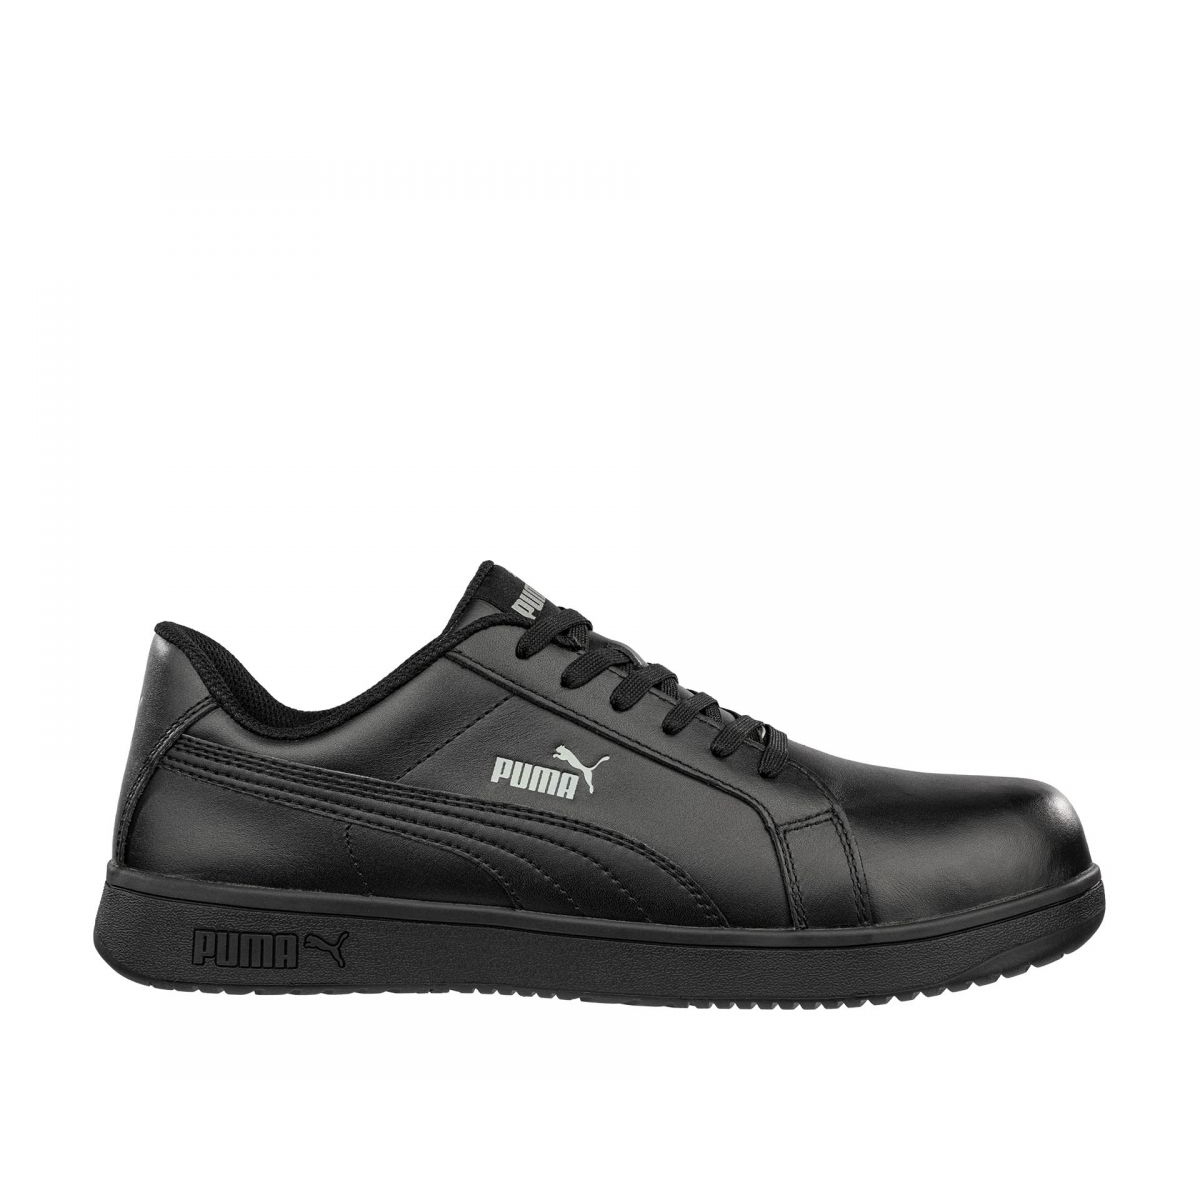 PUMA Safety Women's Iconic Low Composite Toe SD Work Shoes Smooth Black Leather - 640105 BLACK - BLACK, 7.5